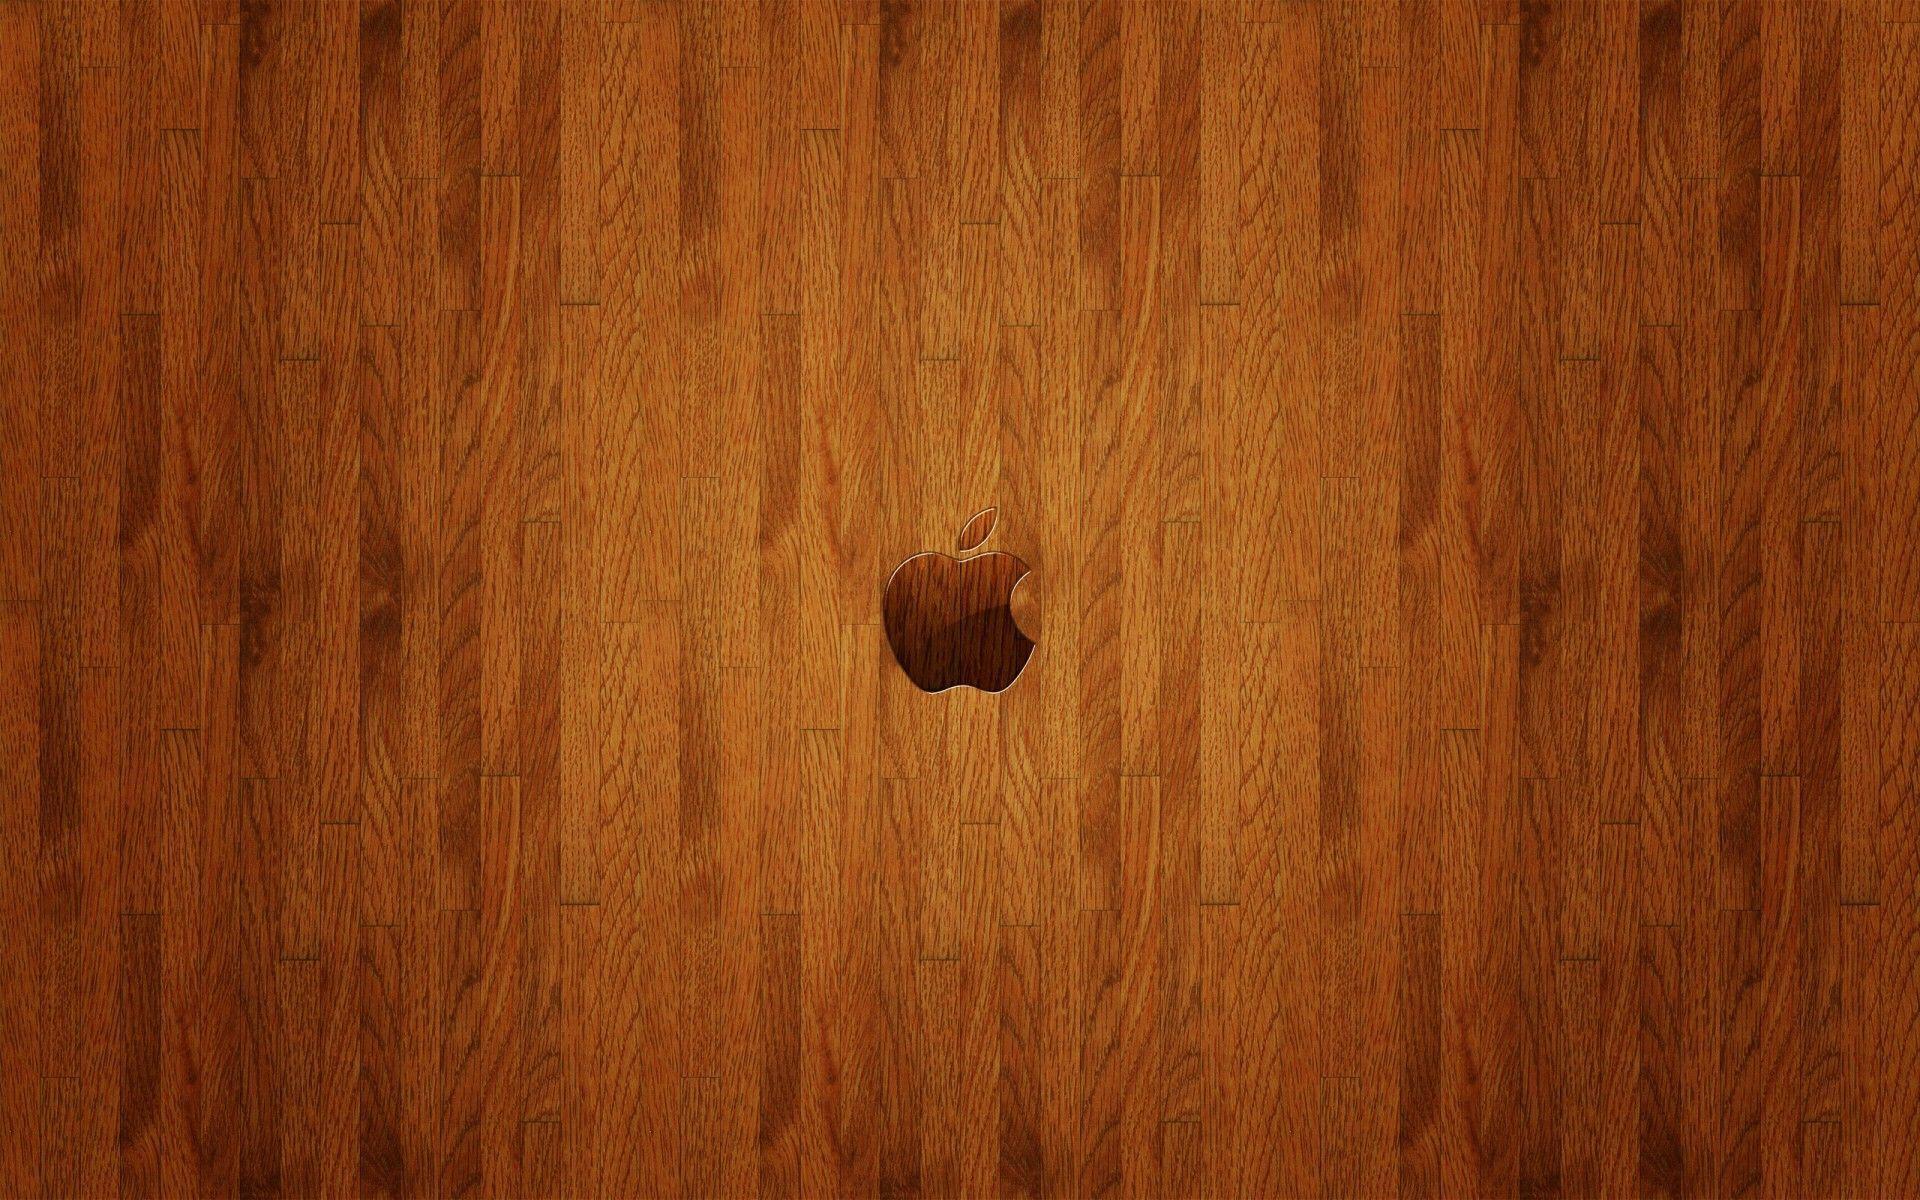 HD Wood WallpaperBackground For Free Download. wallpaper